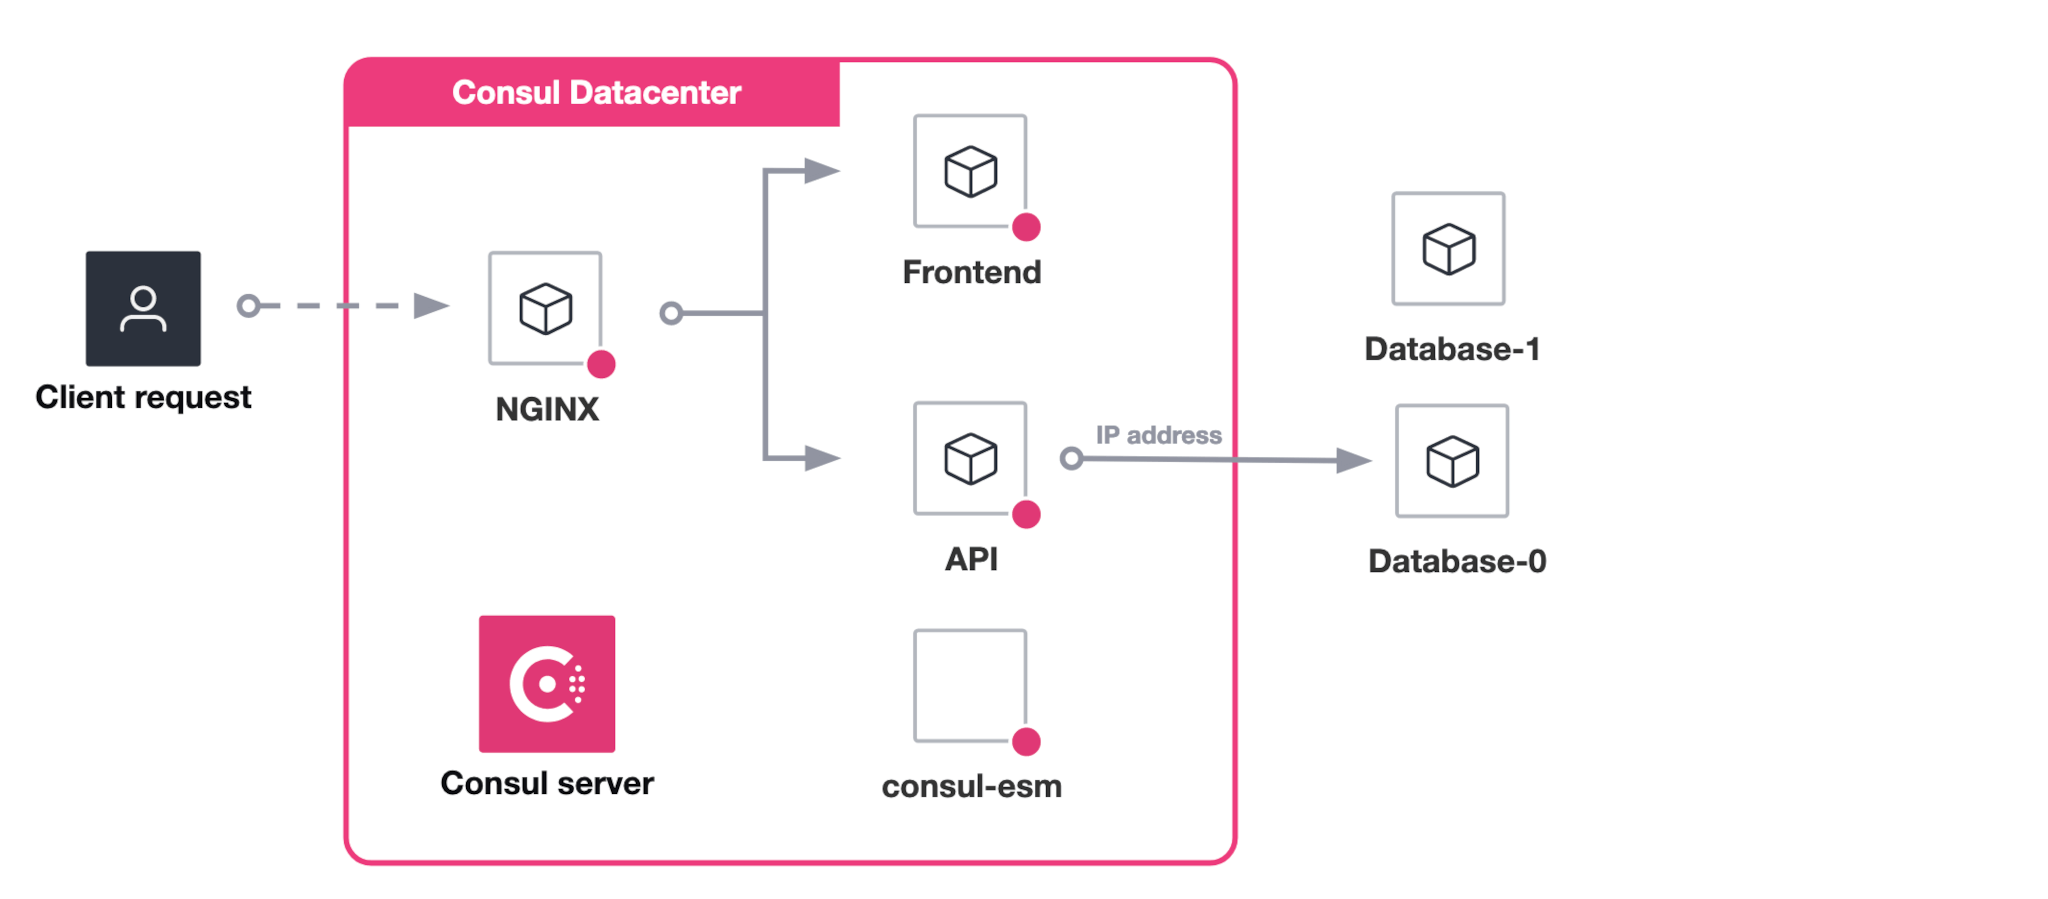 Architecture diagram. Initial state. Two instances of database service run on nodes that are external to the Consul datacenter. The API service in the datacenter communicates with one node using its IP address.